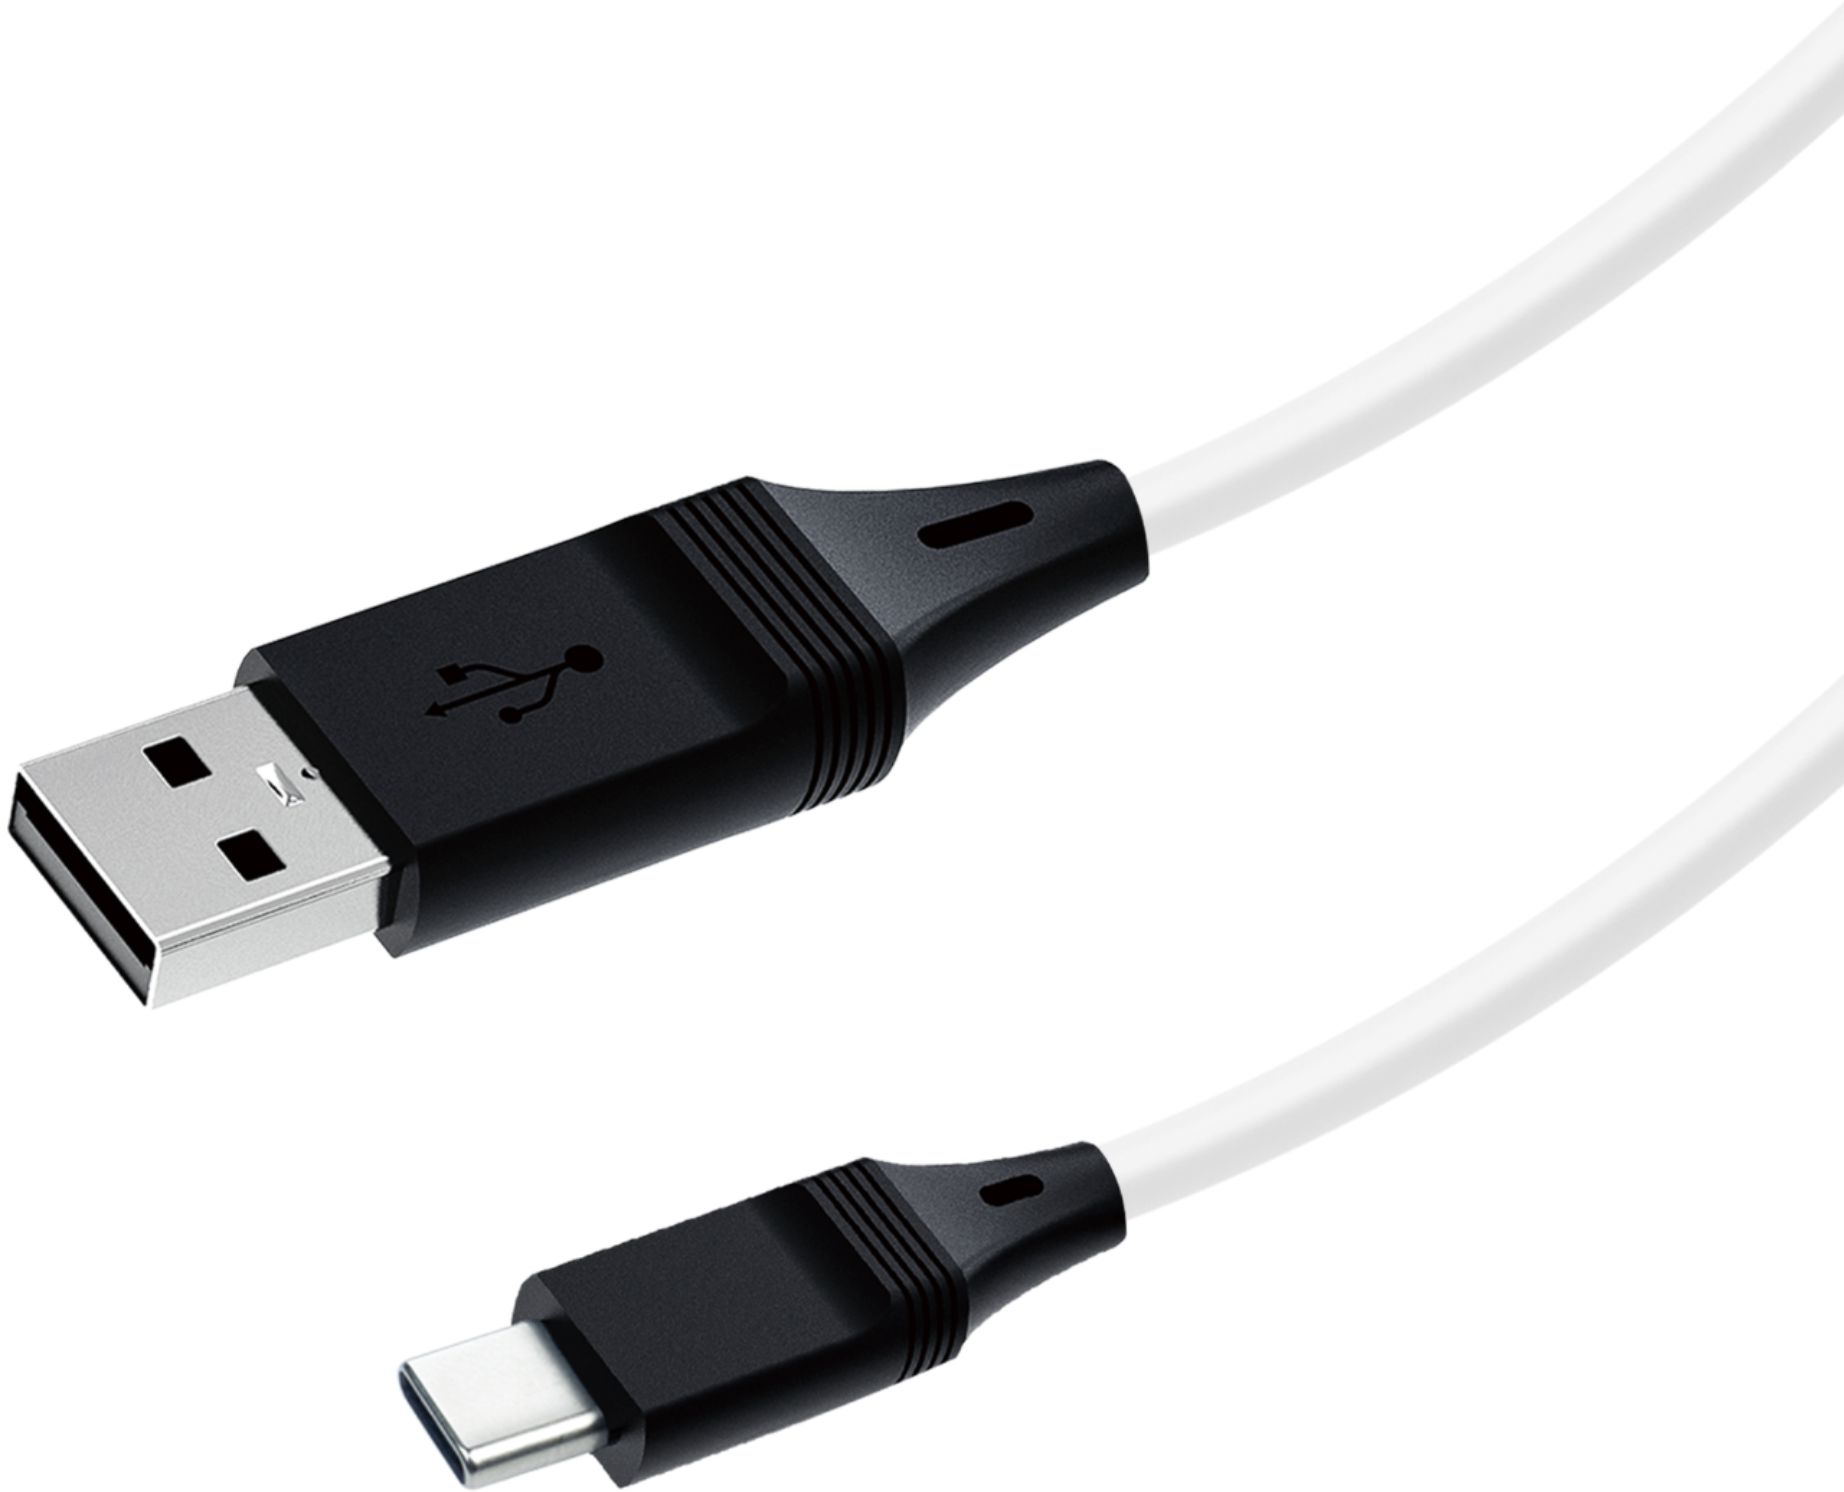 Long Play & Charge USB-C Cable for PS5 Controller Playstation 5